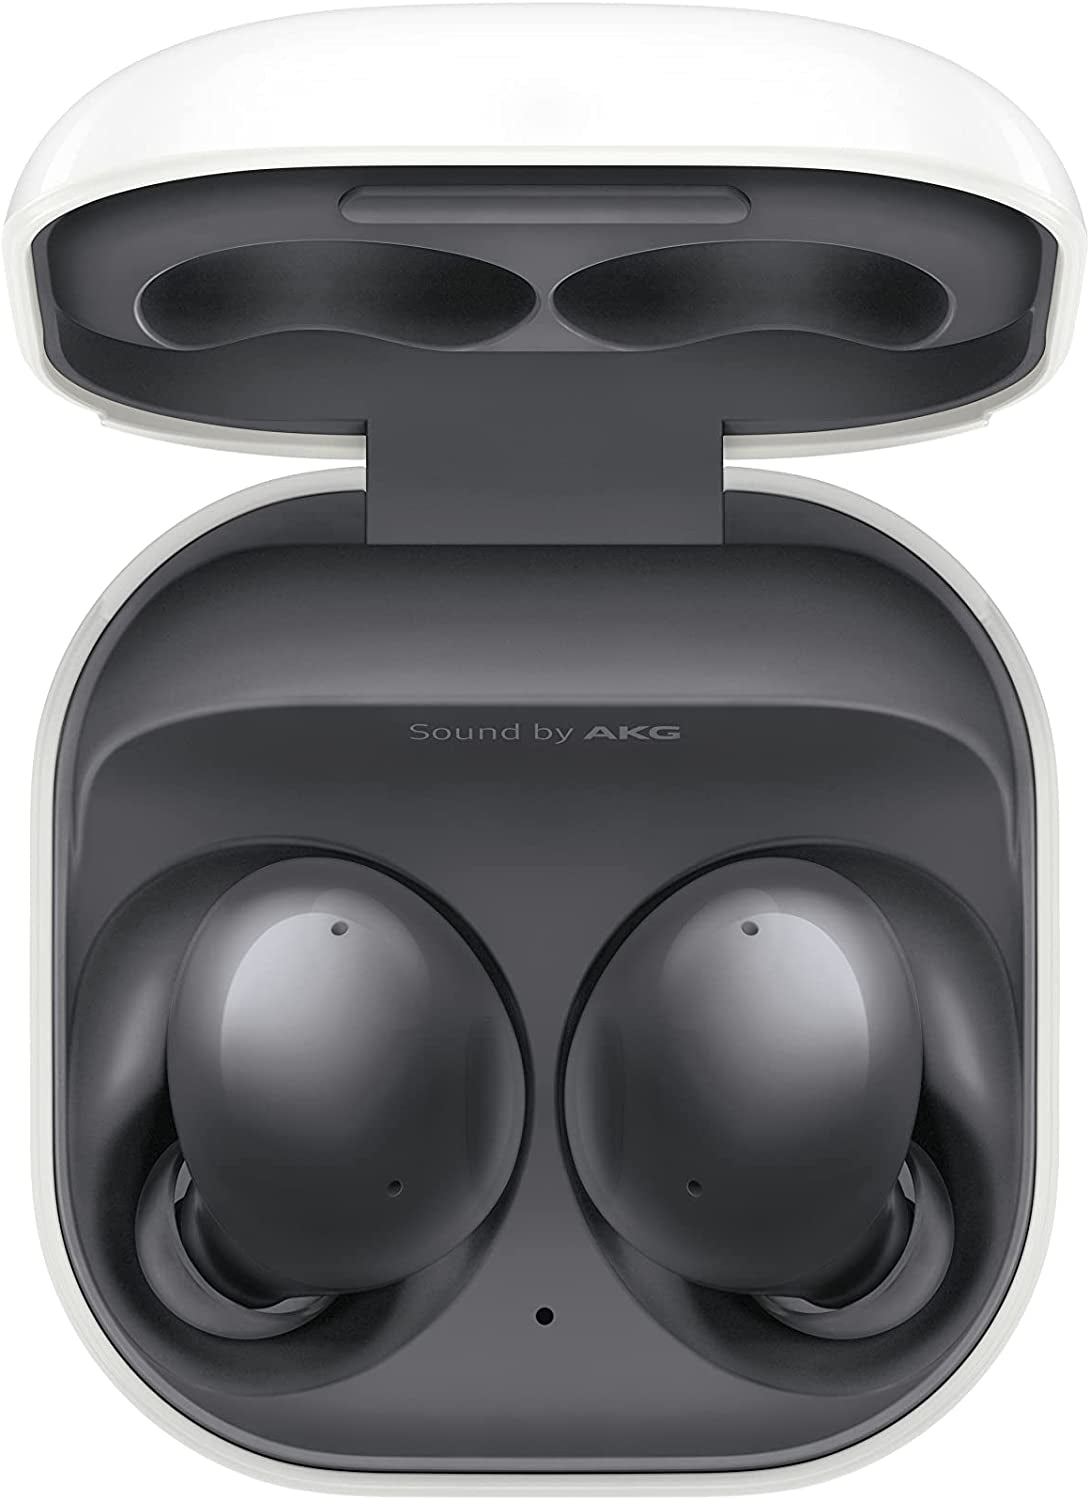 Samsumg Galaxy Buds 2 True Wireless Bluetooth Earbuds, Noise Cancelling, Ambient Sound, Lightweight Comfort Fit in Ear, Auto Switch Audio, Long Battery Life, Touch Control US Version, Graphite